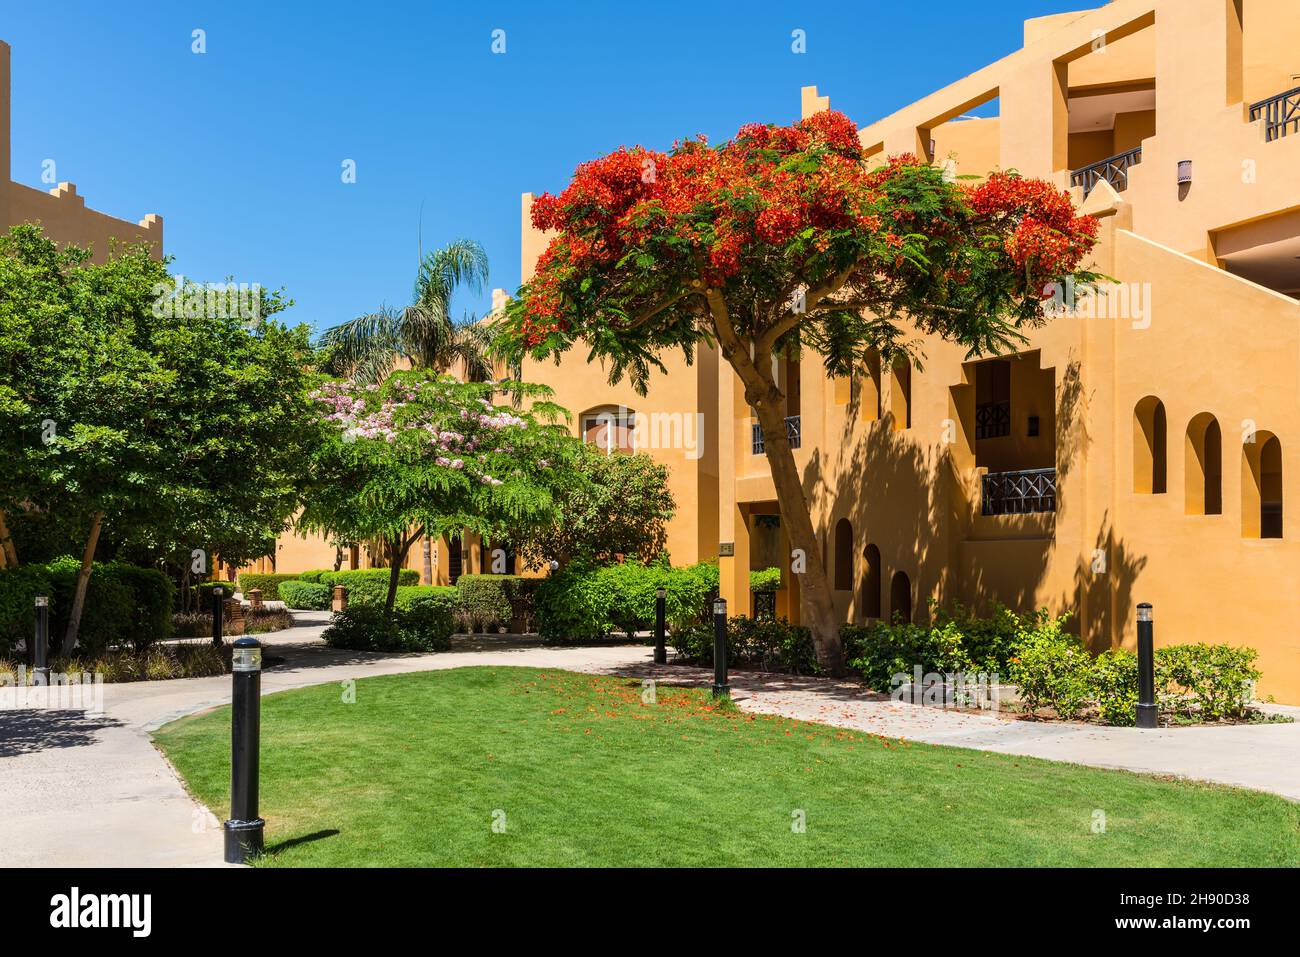 Hurghada, Egypt - May 26, 2021: View of the hotel's villas and flowering tree of the Stella Di Mare Beach Resort and Spa located in Makadi Bay, which Stock Photo